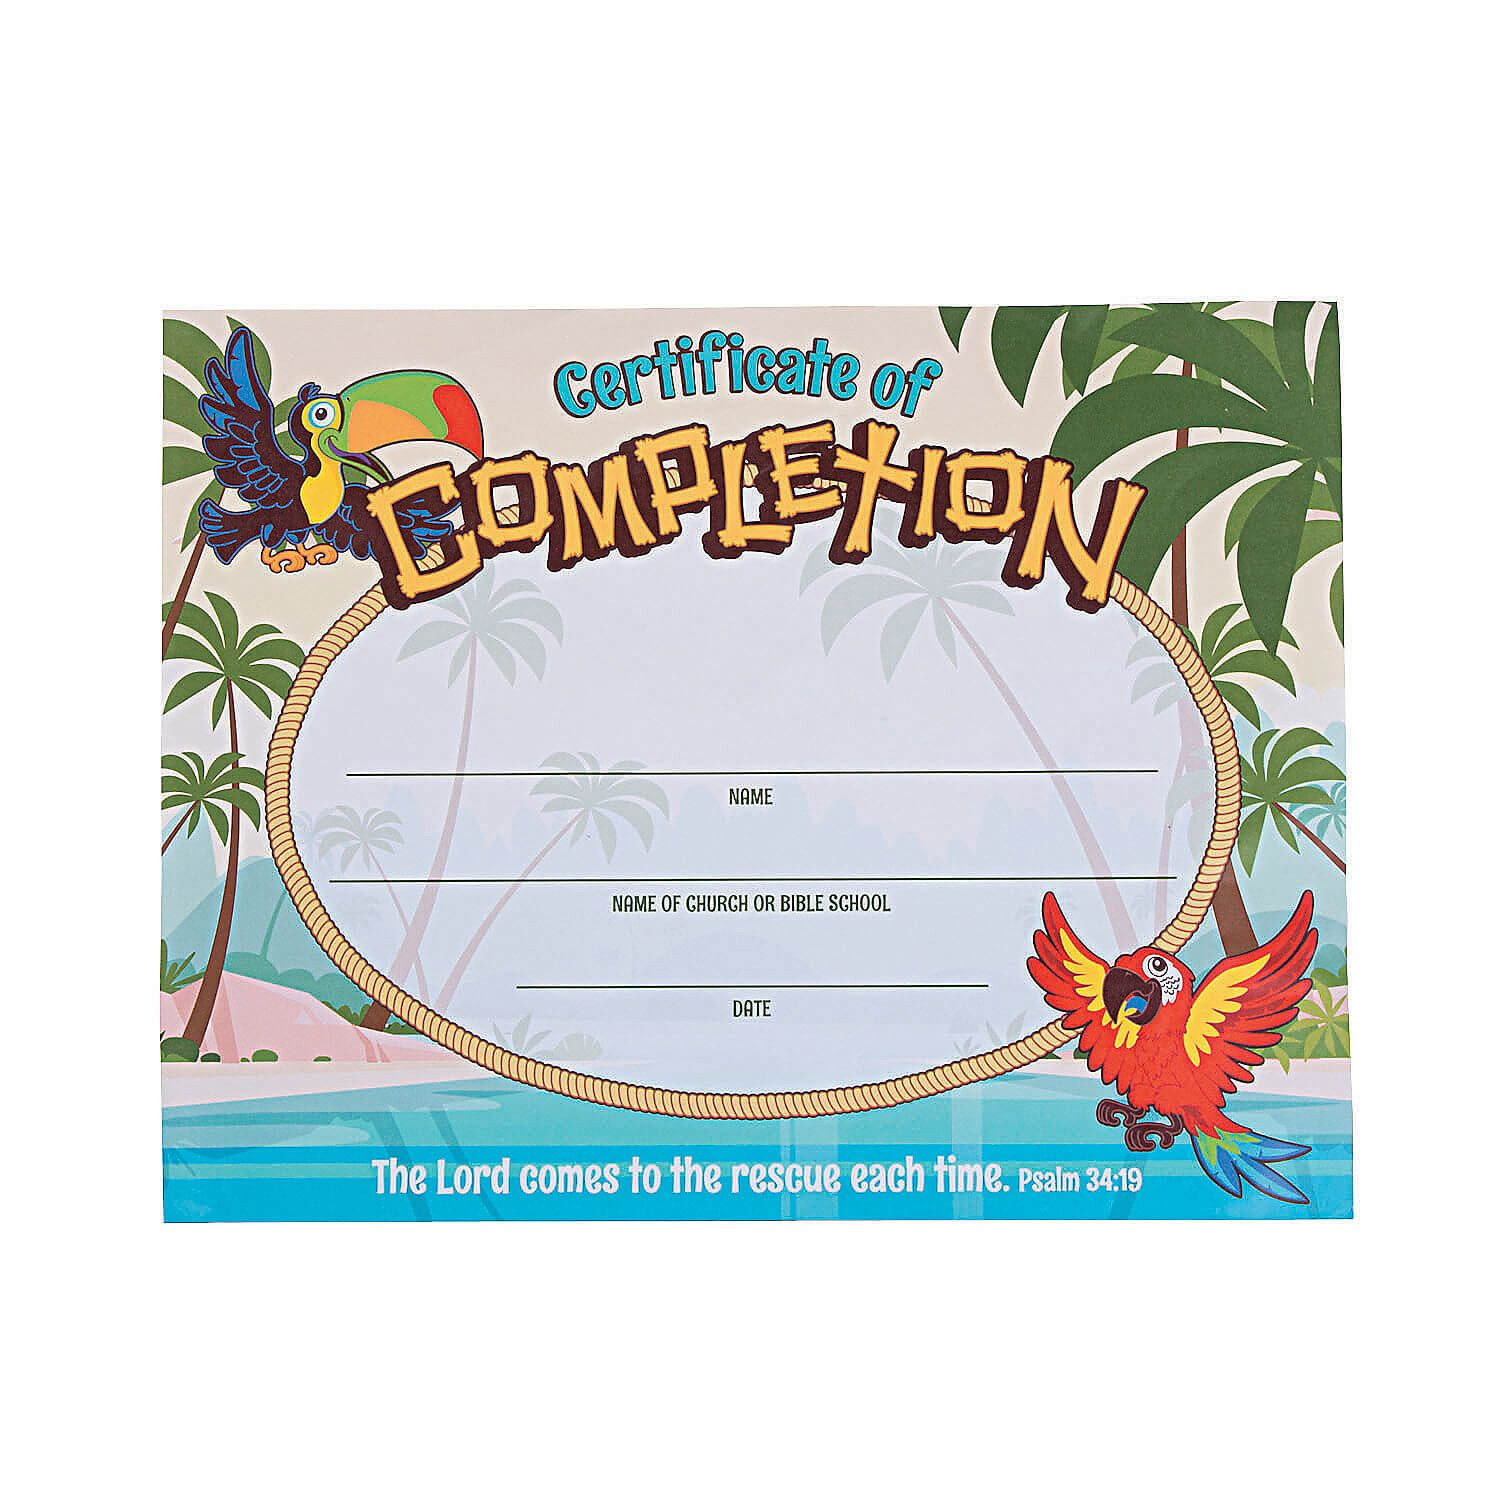 Island Vbs Certificates Of Completion | Certificate For Vbs Certificate Template